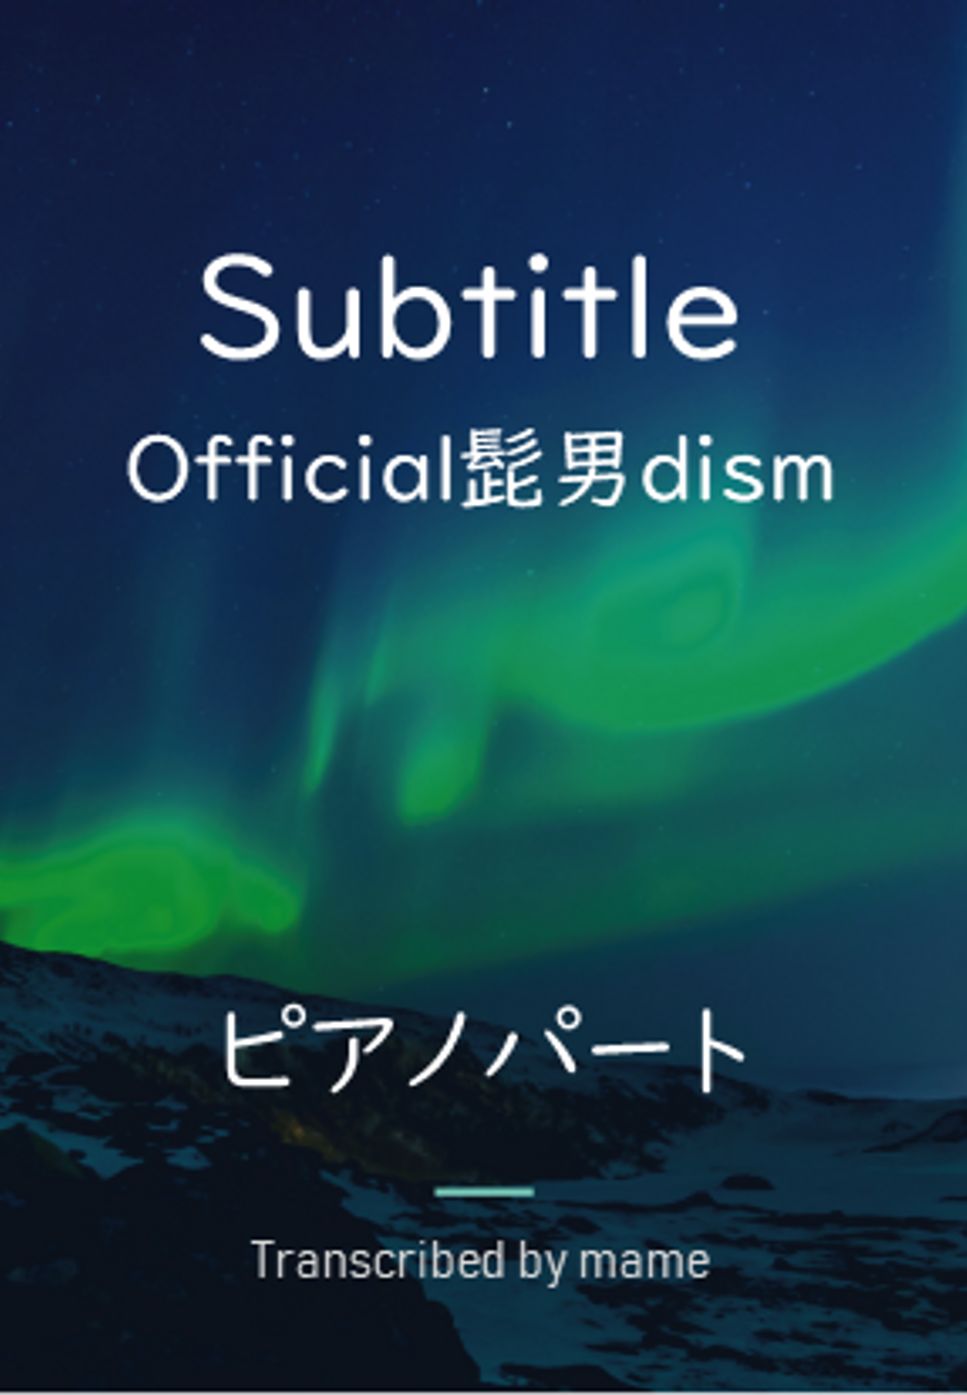 Official髭男dism - Subtitle (piano part) by mame